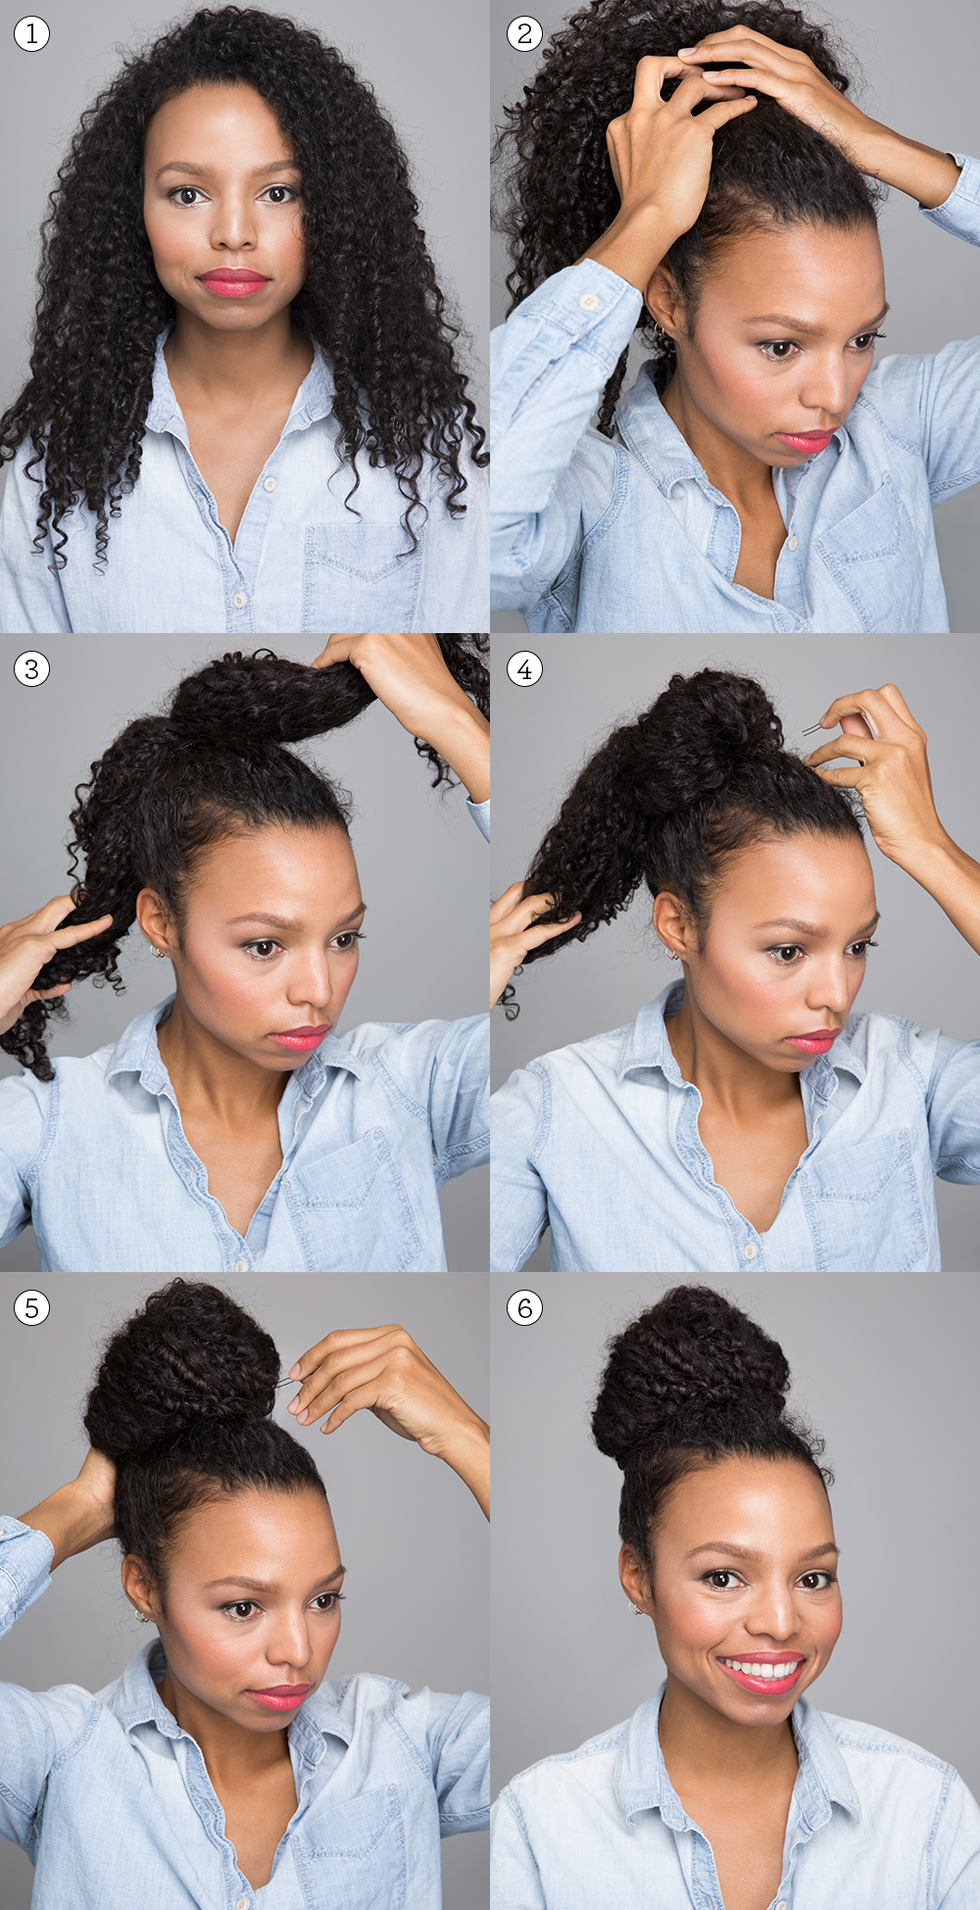 5 CUTE CURLY HAIRSTYLES  QUICK & SIMPLE HAIRSTYLES FOR LONG CURLY